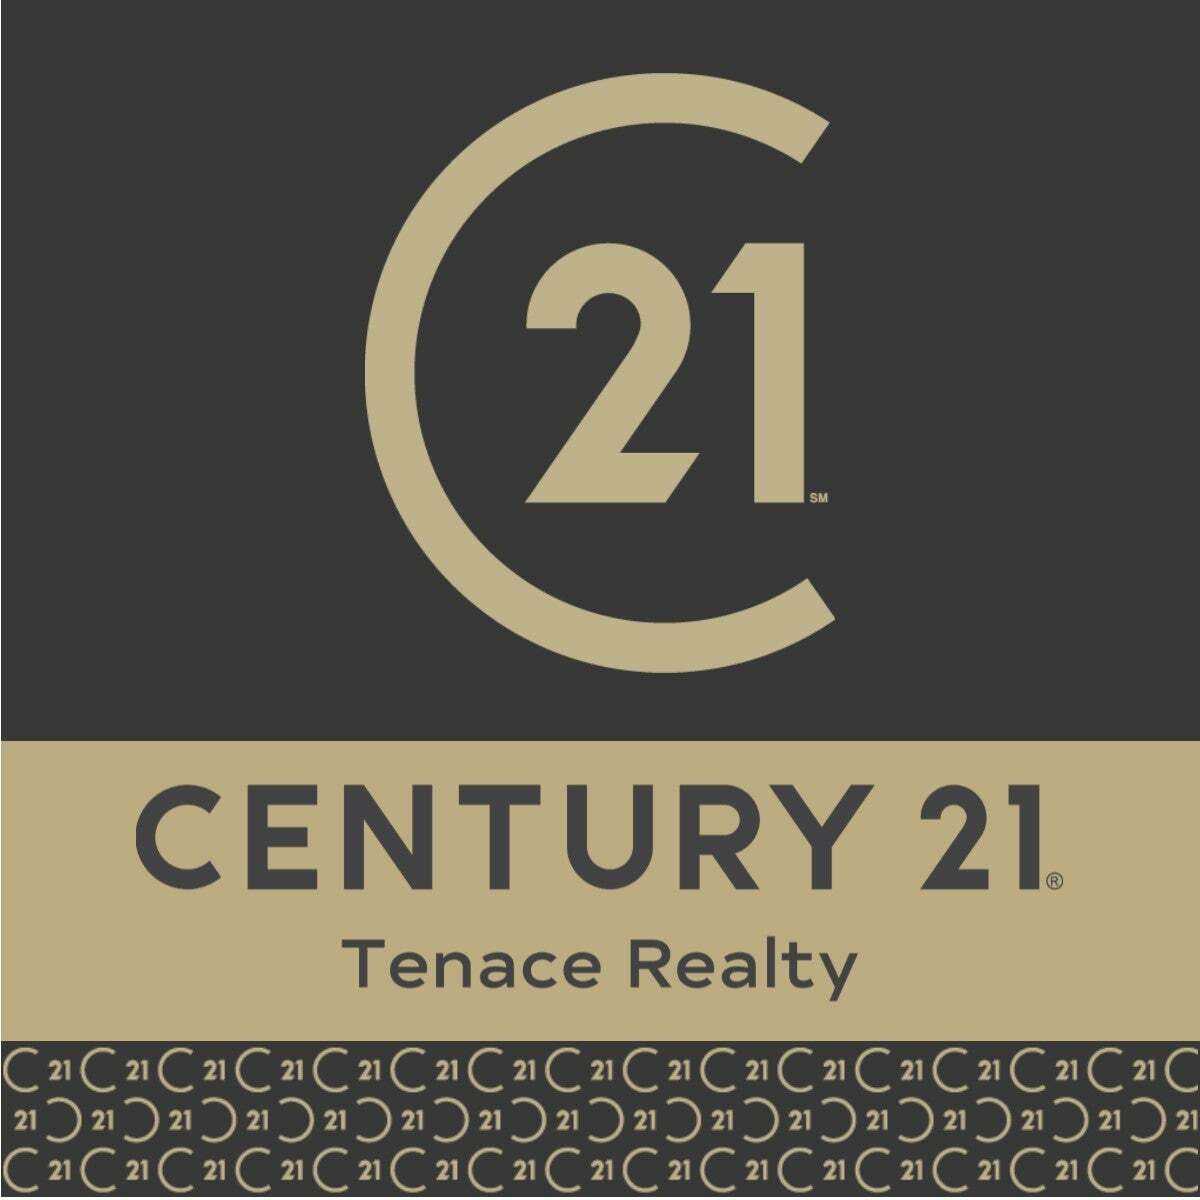 Mahtab Bagie, Real Estate Salesperson in Coral Springs, Tenace Realty